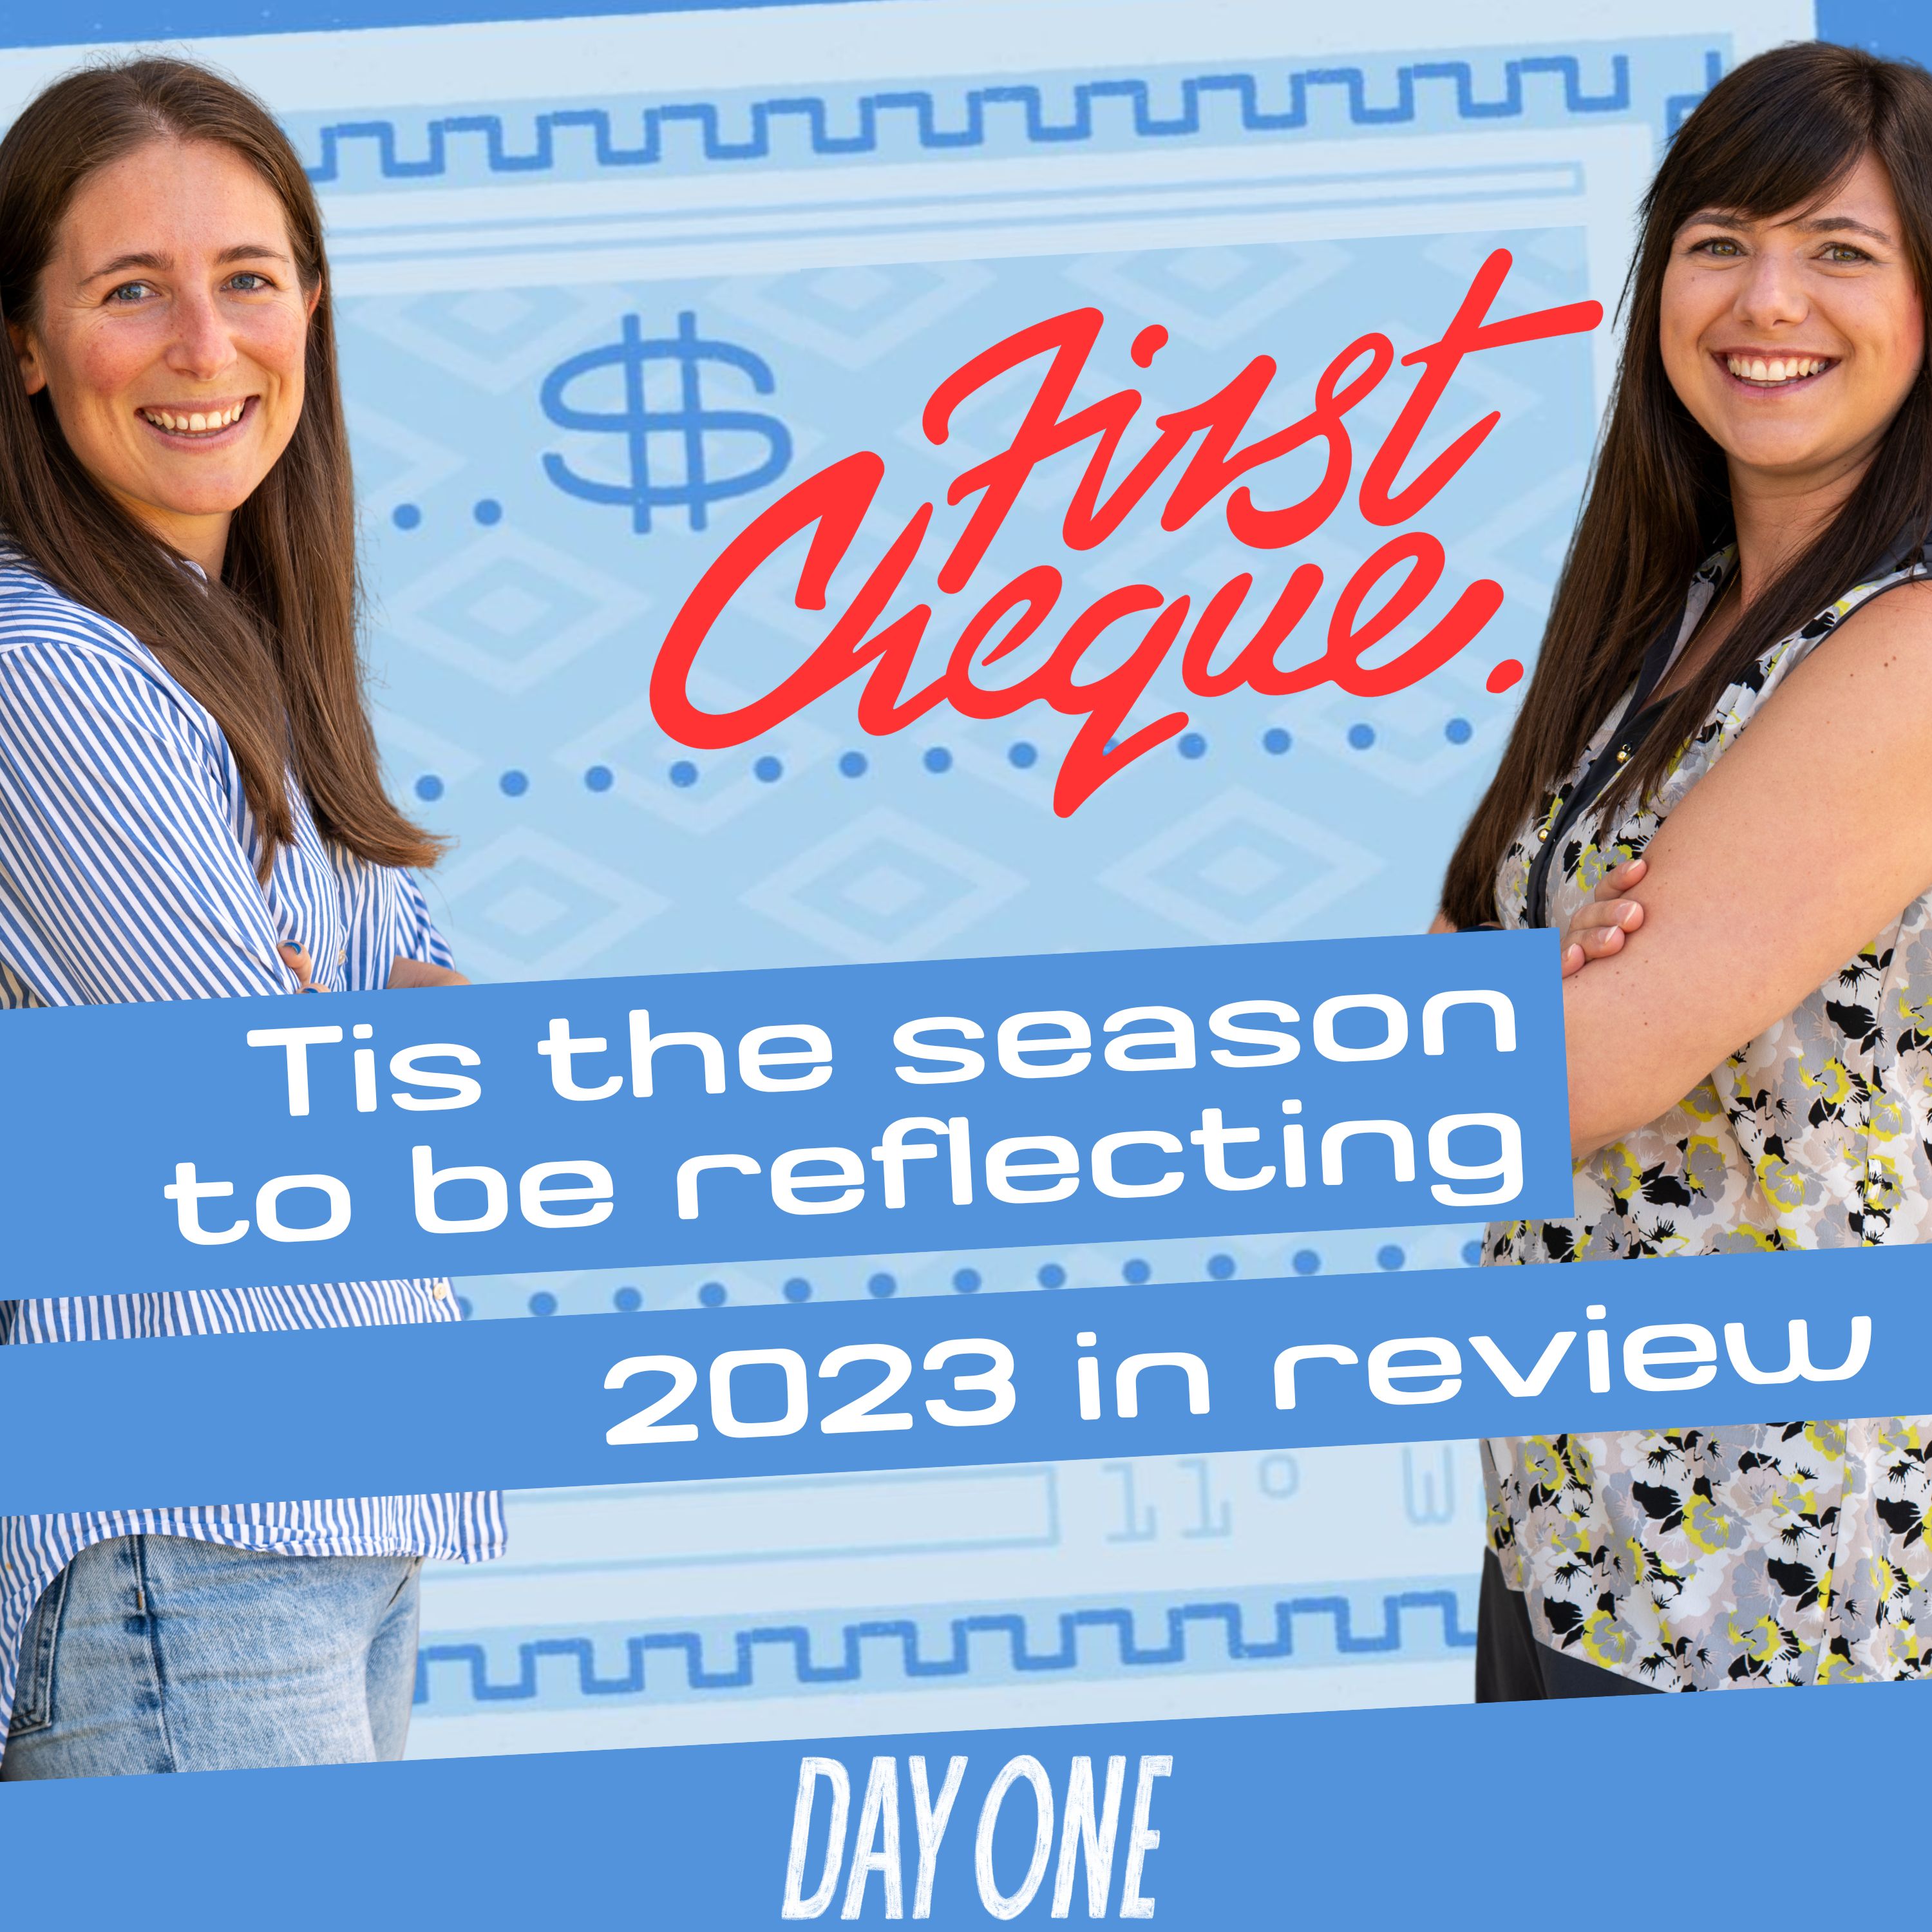 Tis the season to be reflective - 2023 in review on First Cheque - First Cheque